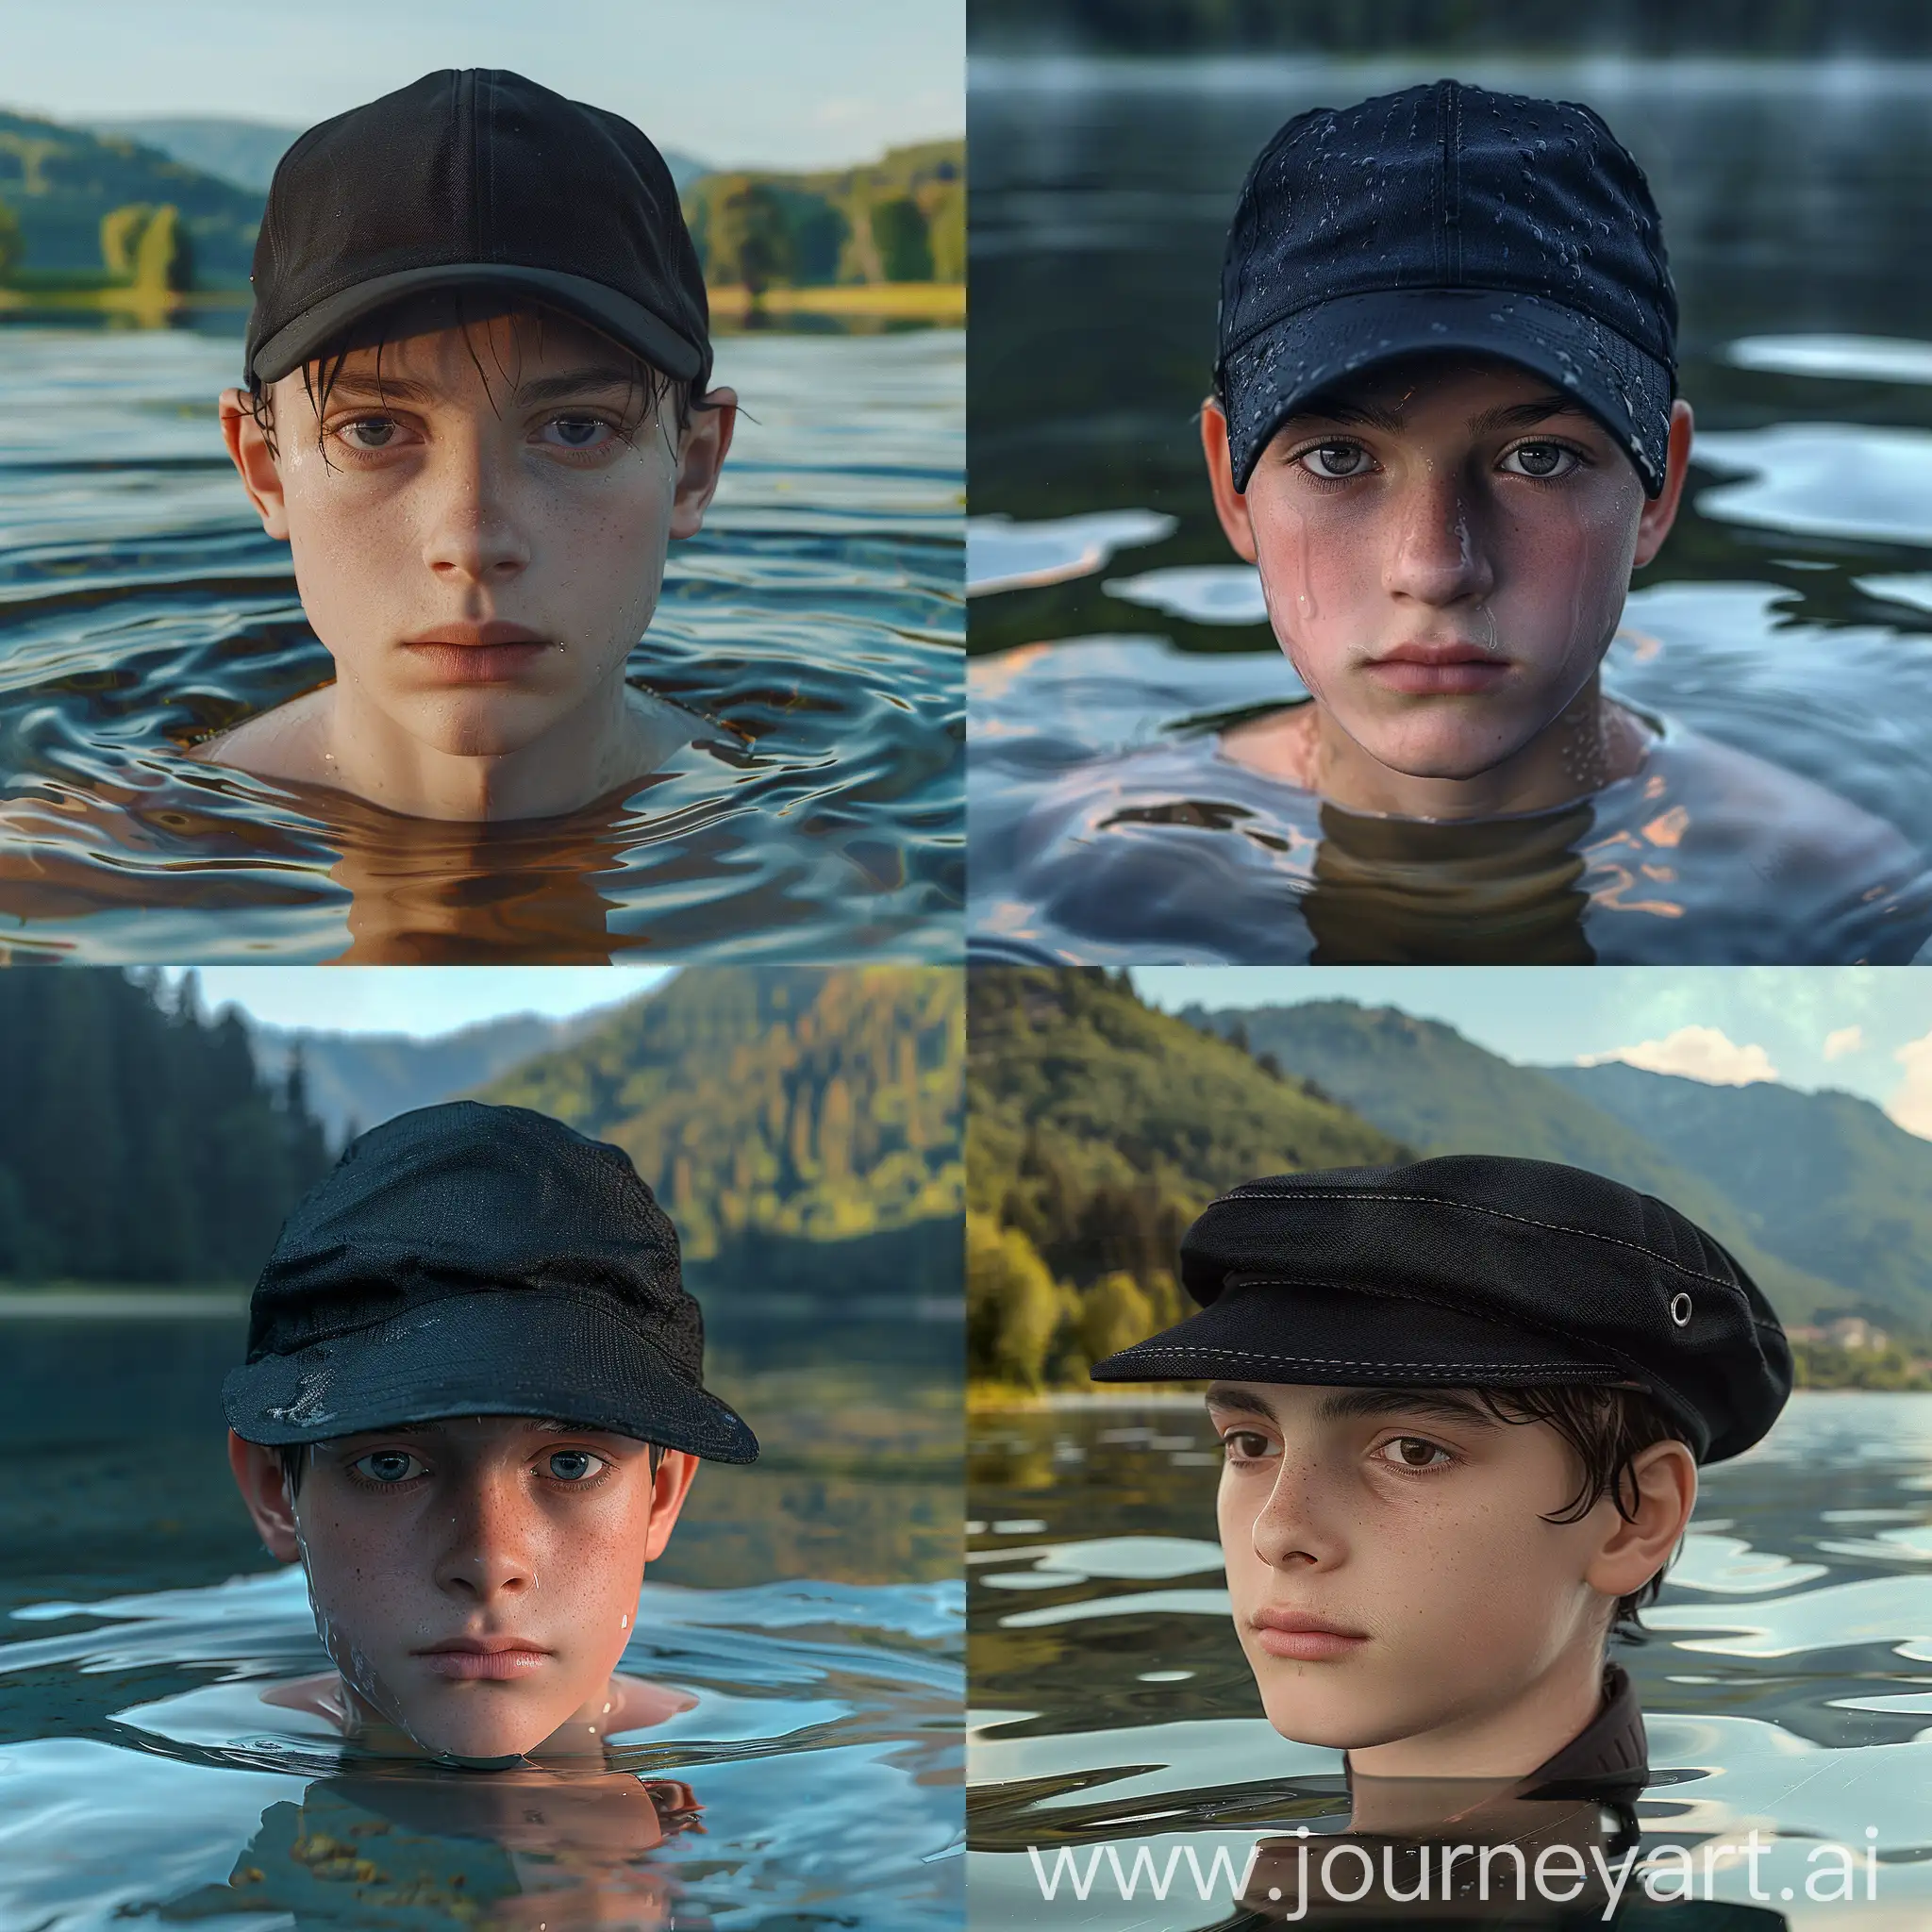 A photography of a boy in his early 20s wearing a black cap. The boy is handsome. He's on a lake somewhere in Europe. The image is extremely detailed and realistic. The colors are vivid. The image will be part of a marketing campaign of a cap company. A natural unaltered 4k photograph, high quality, high resolution.  I want something very very real.